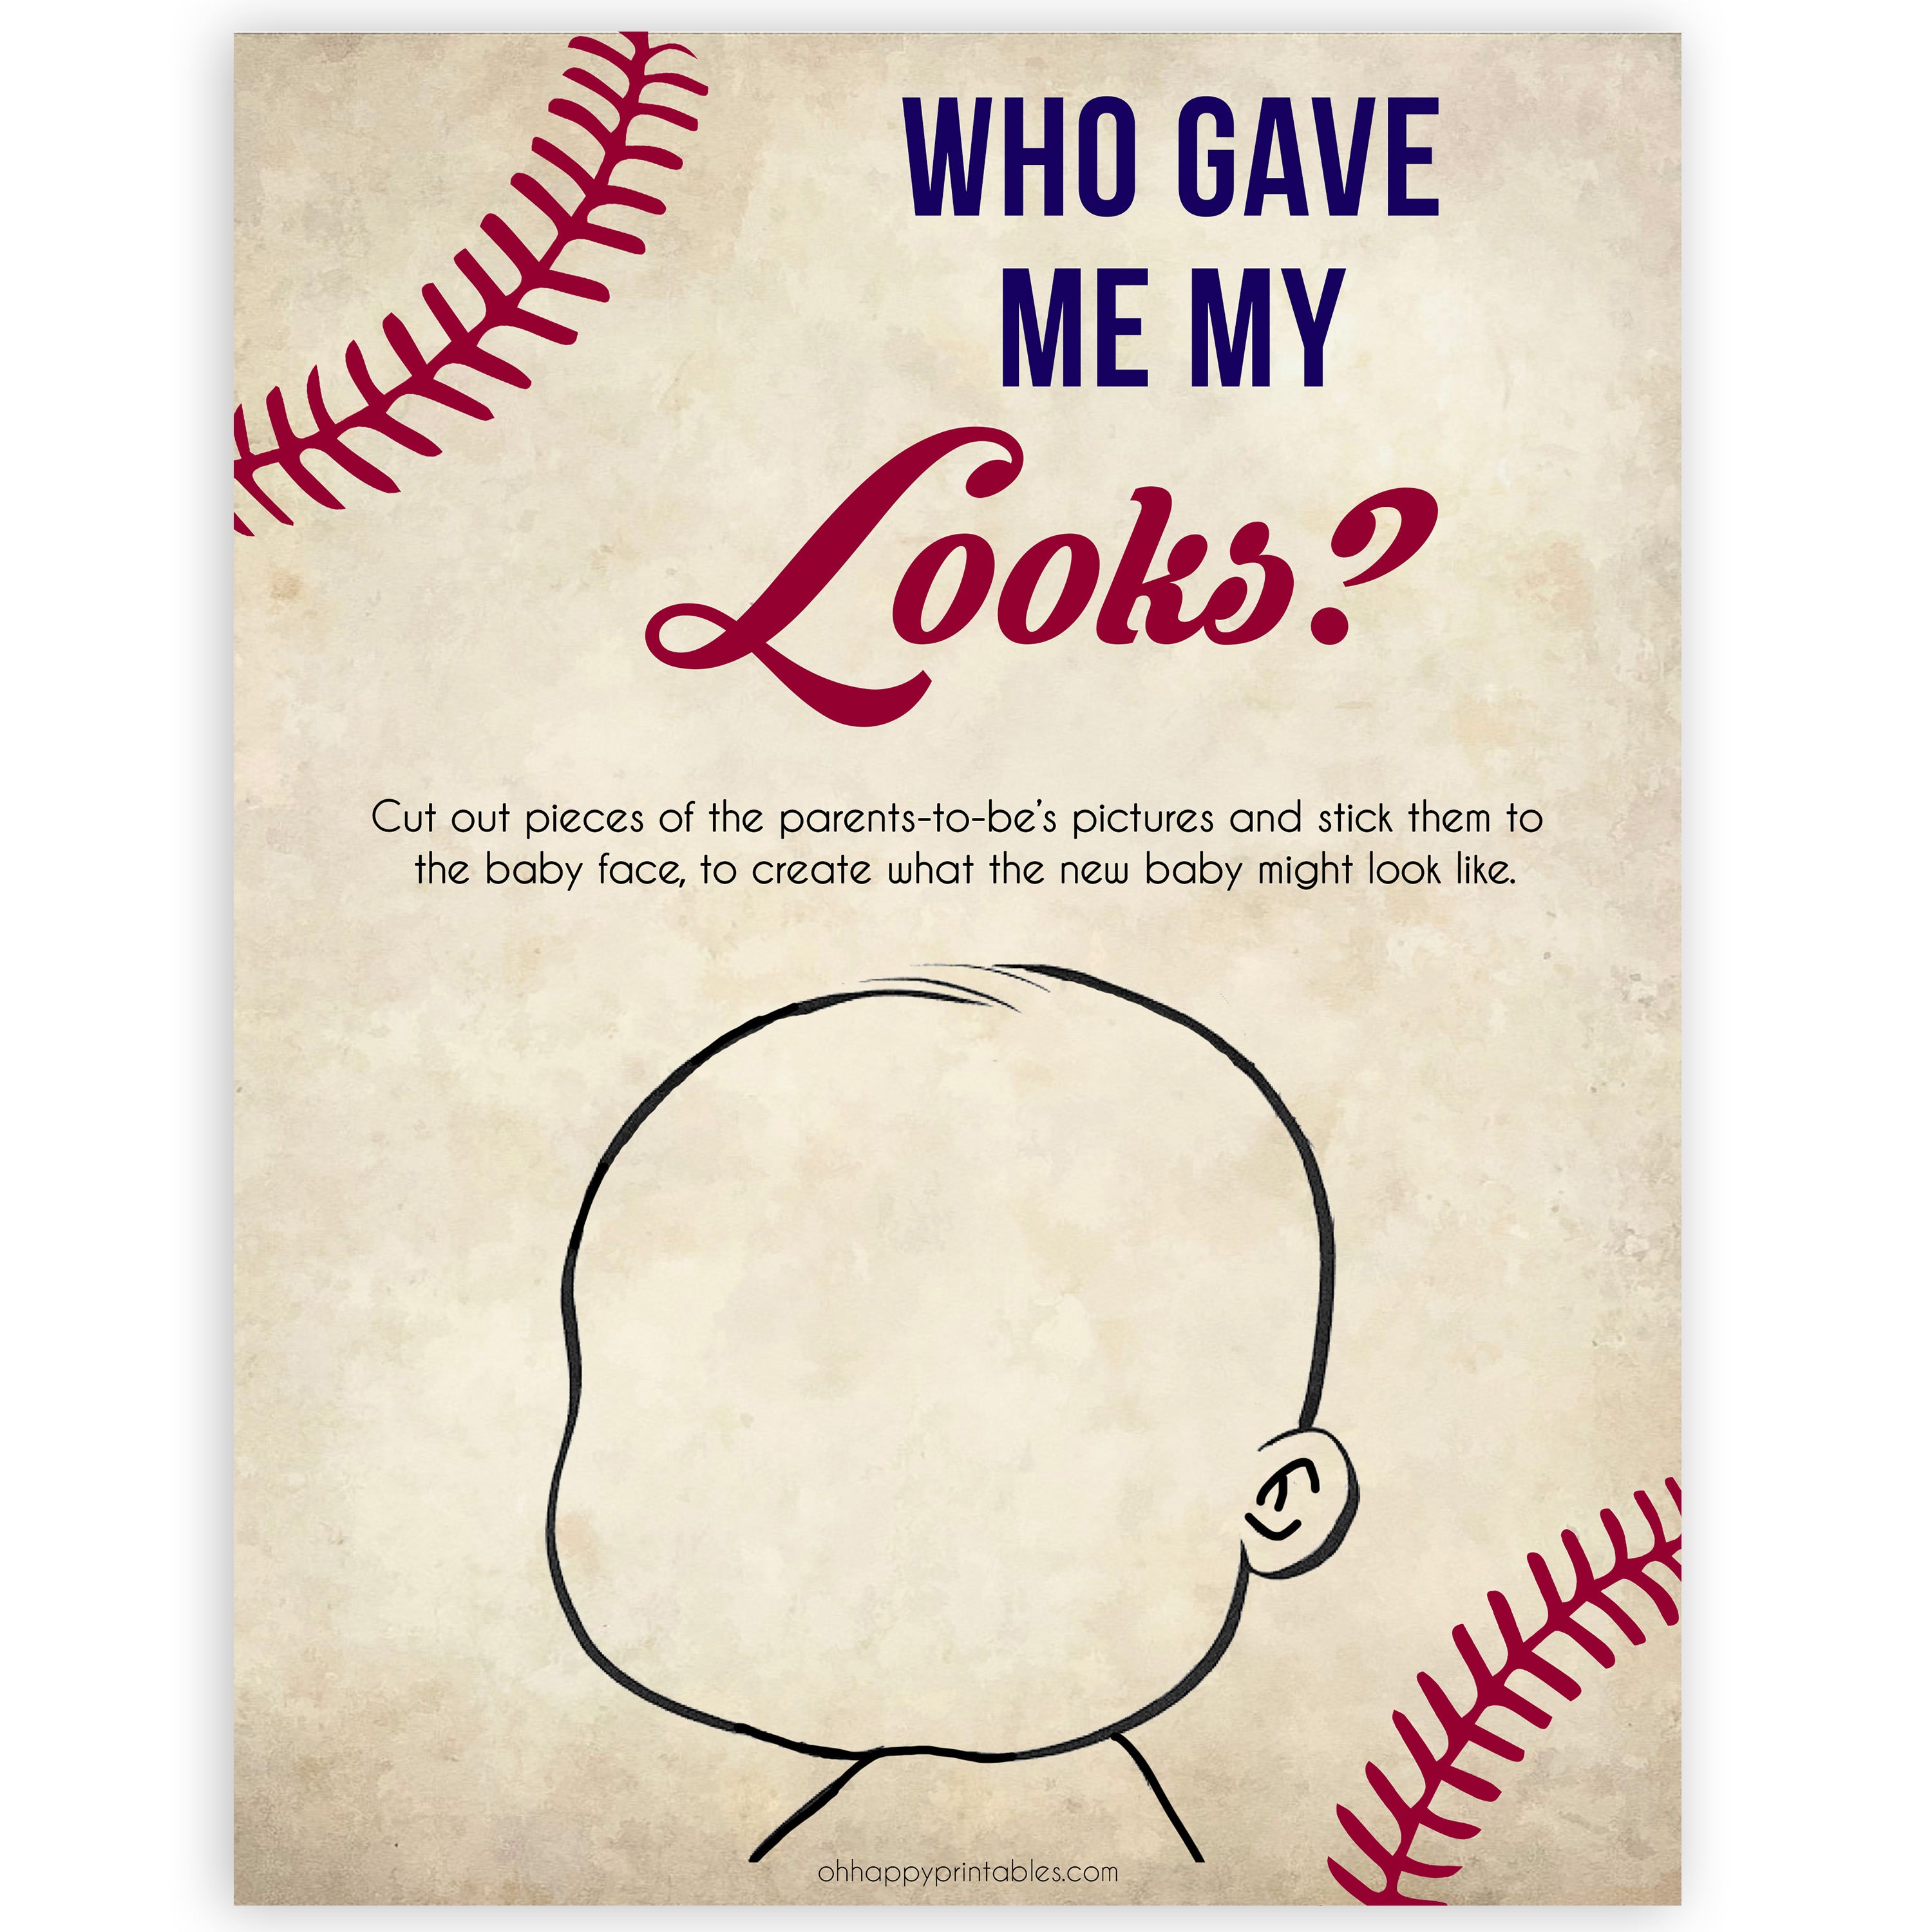 baseball theme baby shower games, who gave me my looks, what will baby look like, printable baby shower games, fun baby shower games, popular baby shower games